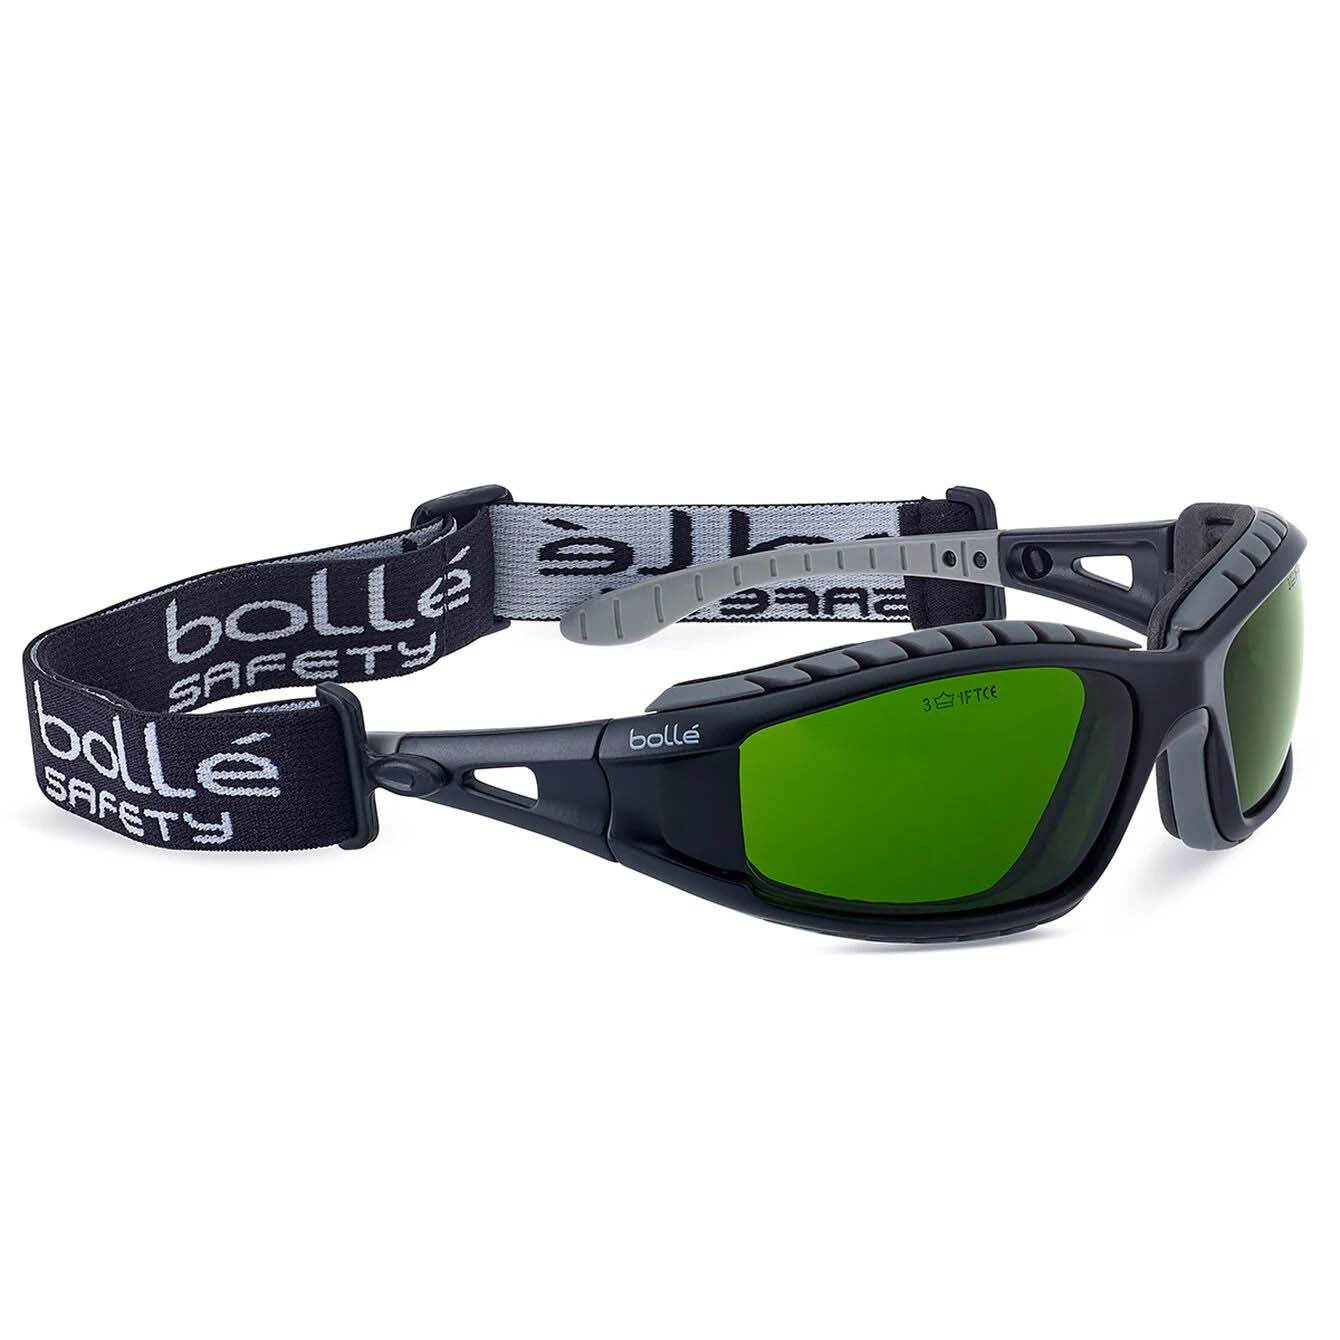 Bolle TRACKER TRACWPCC3 Welding Safety Goggles